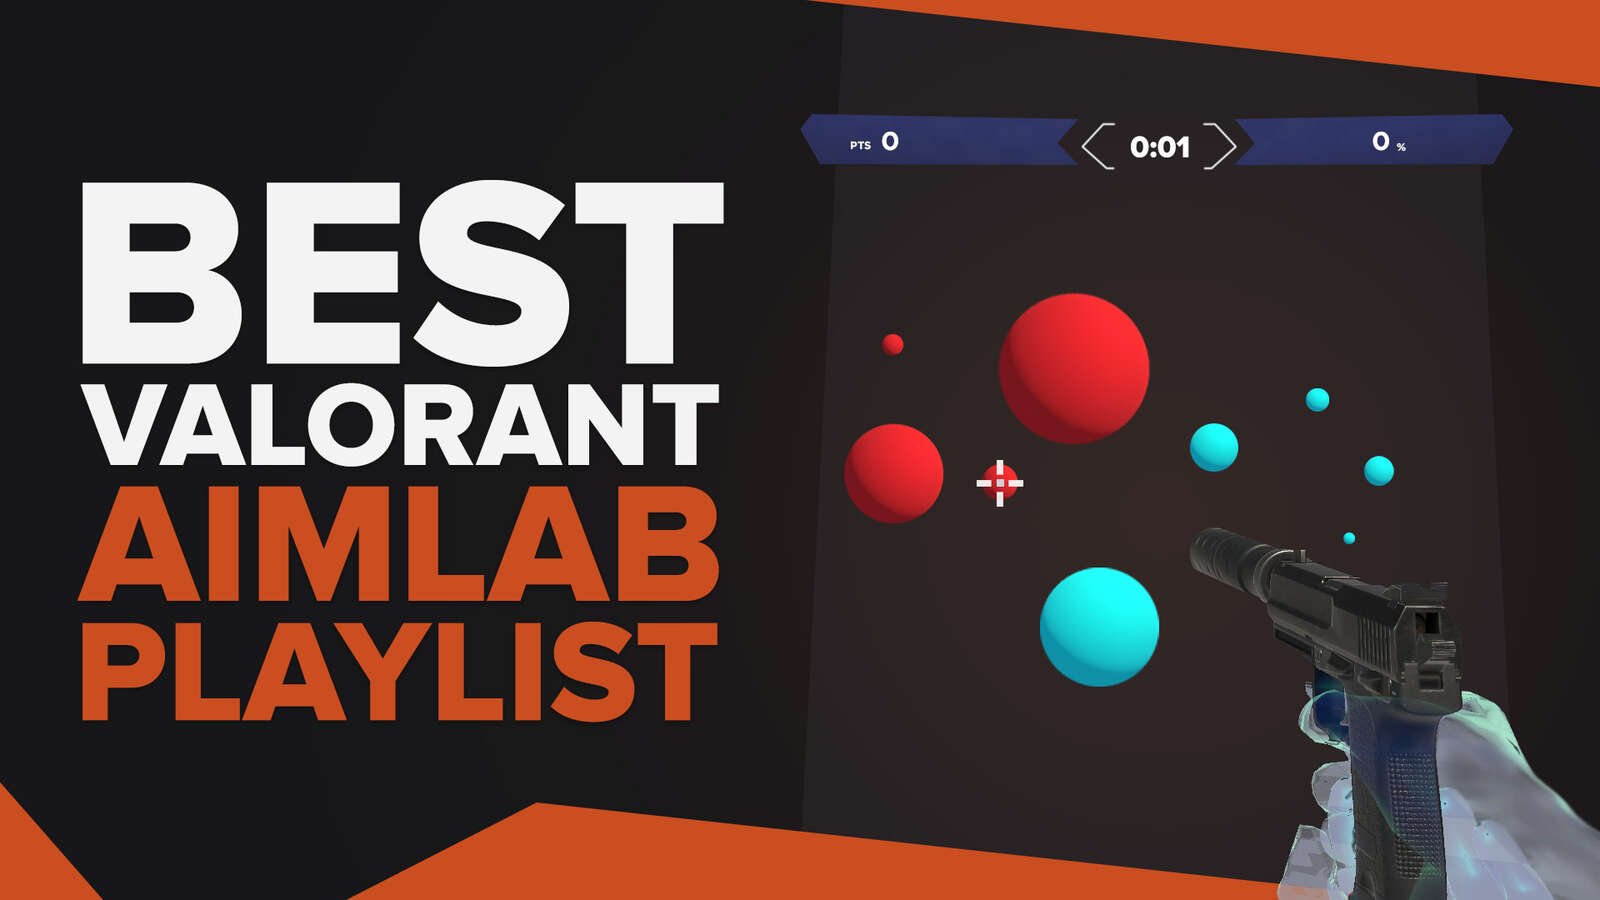 The Best Aim Lab Playlists for improving your aim in Valorant